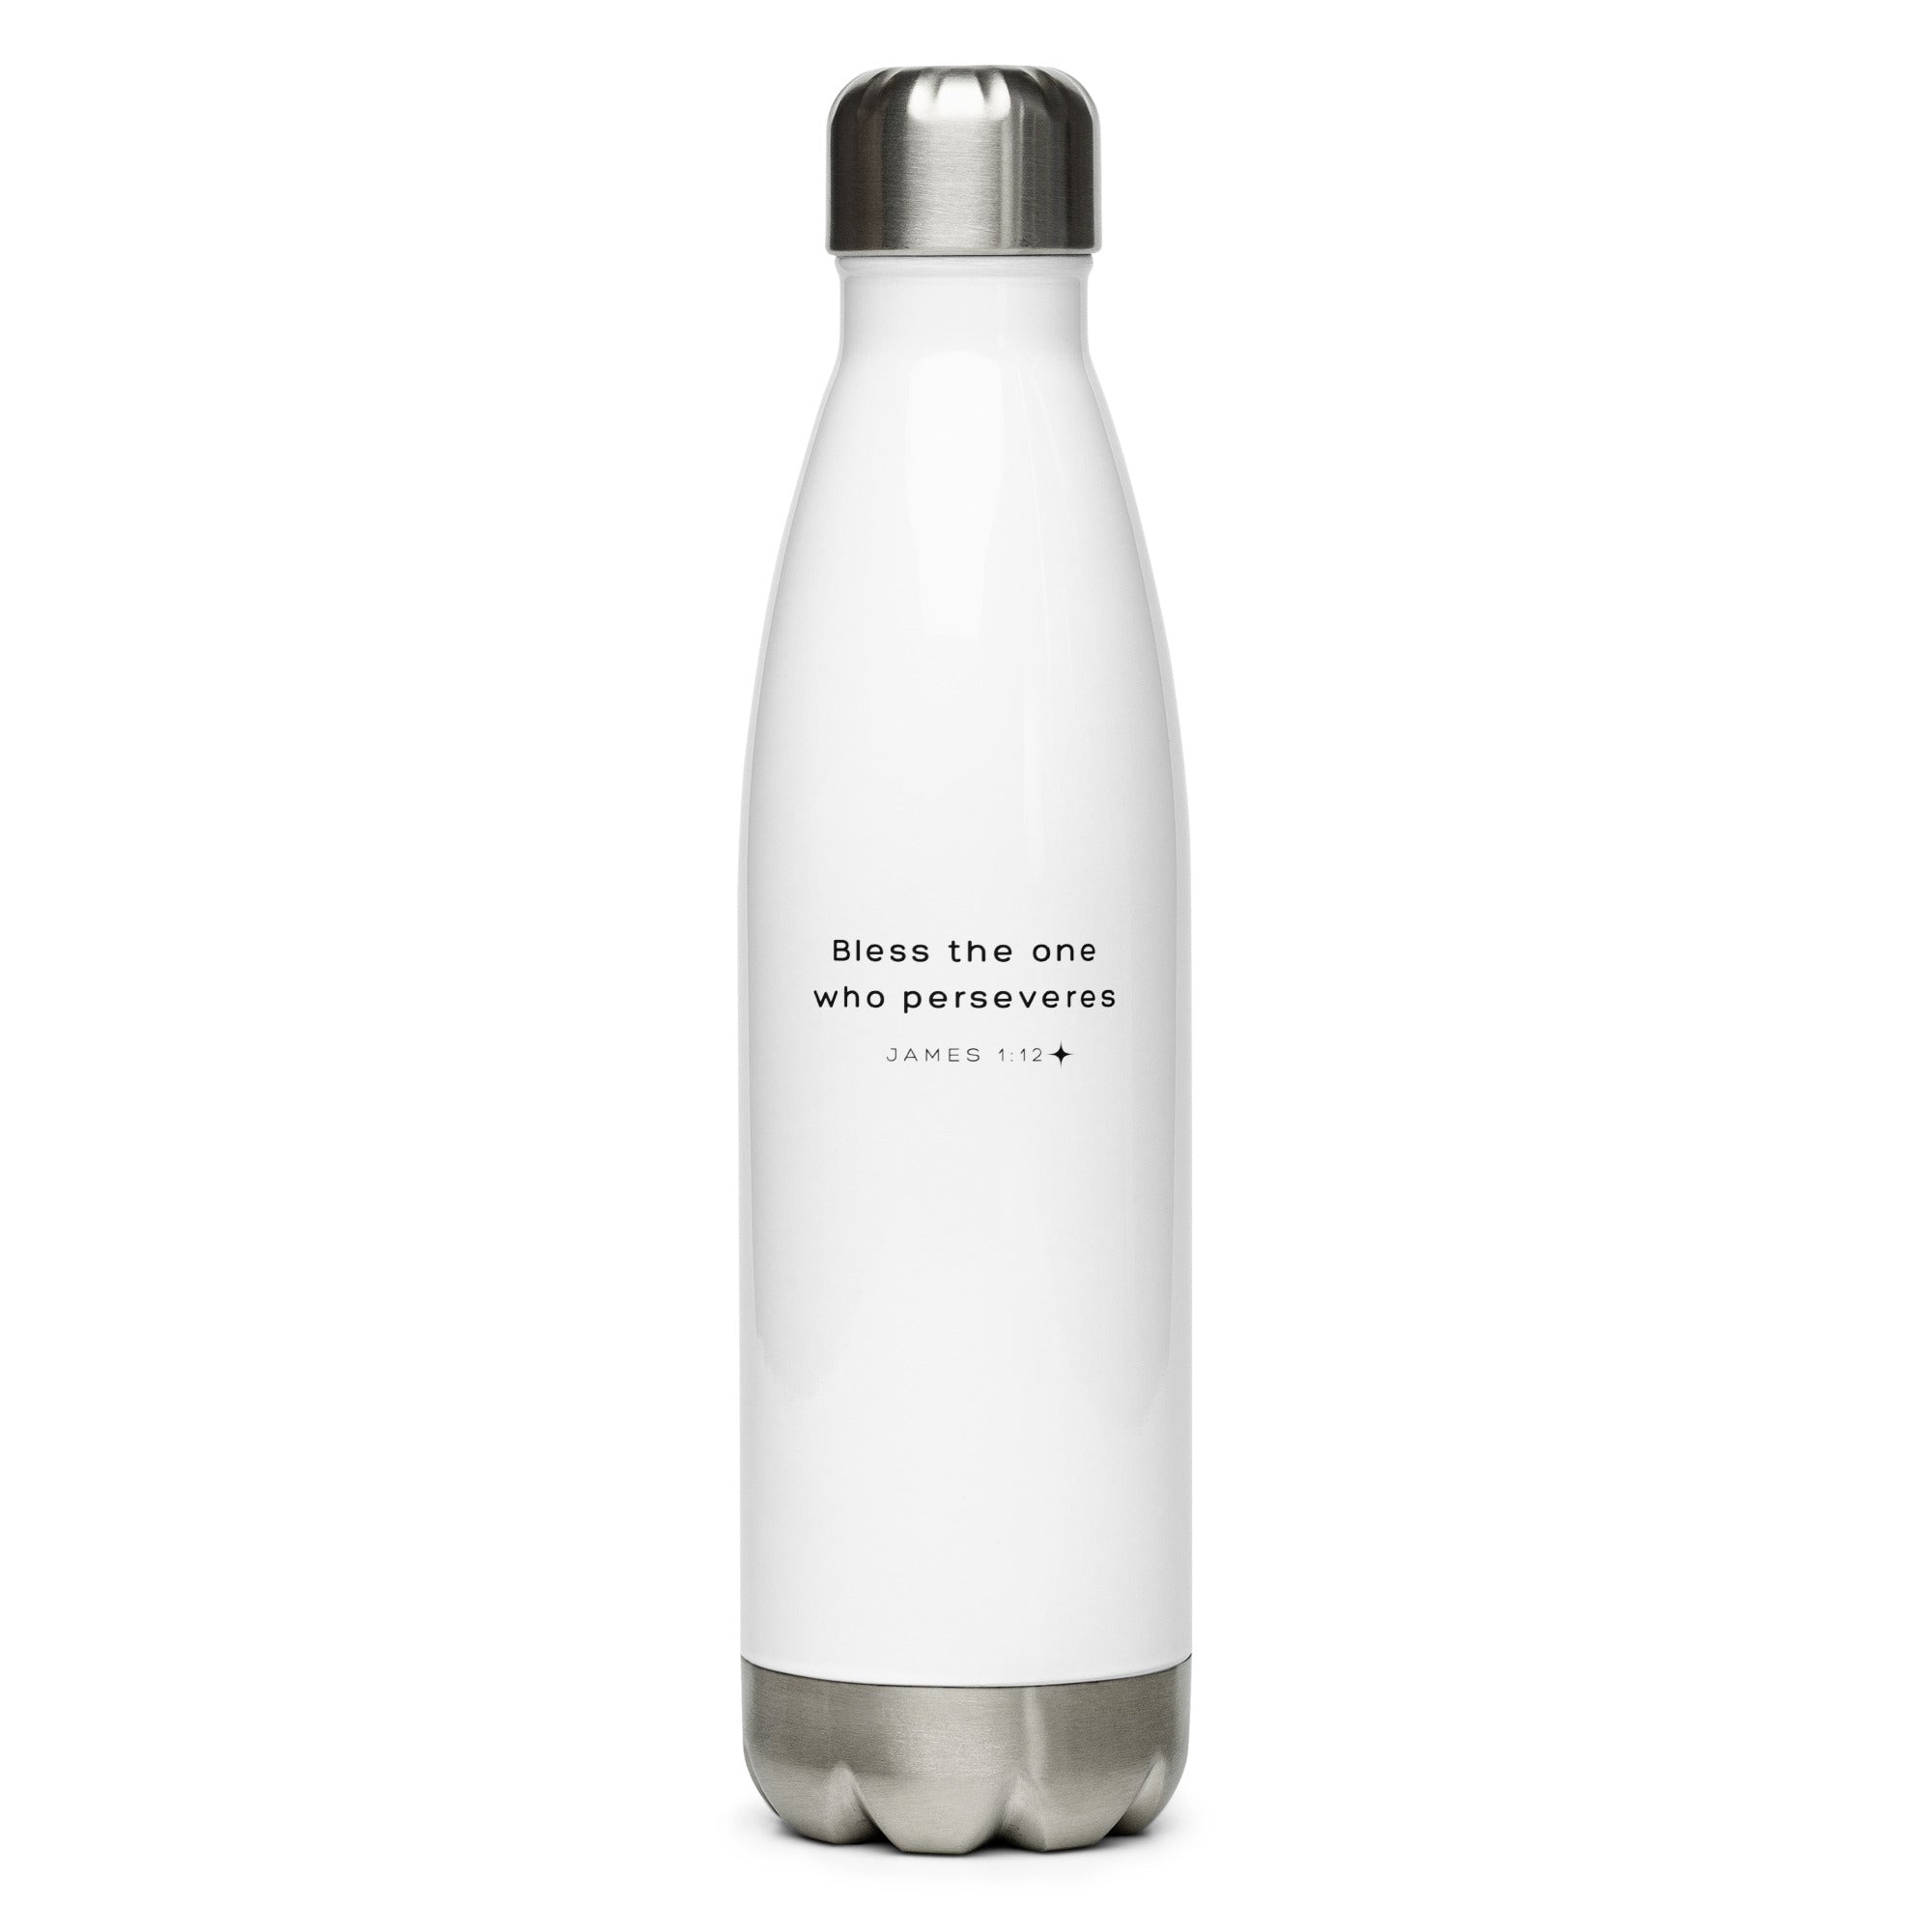 Stainless steel water bottle - James 1:12